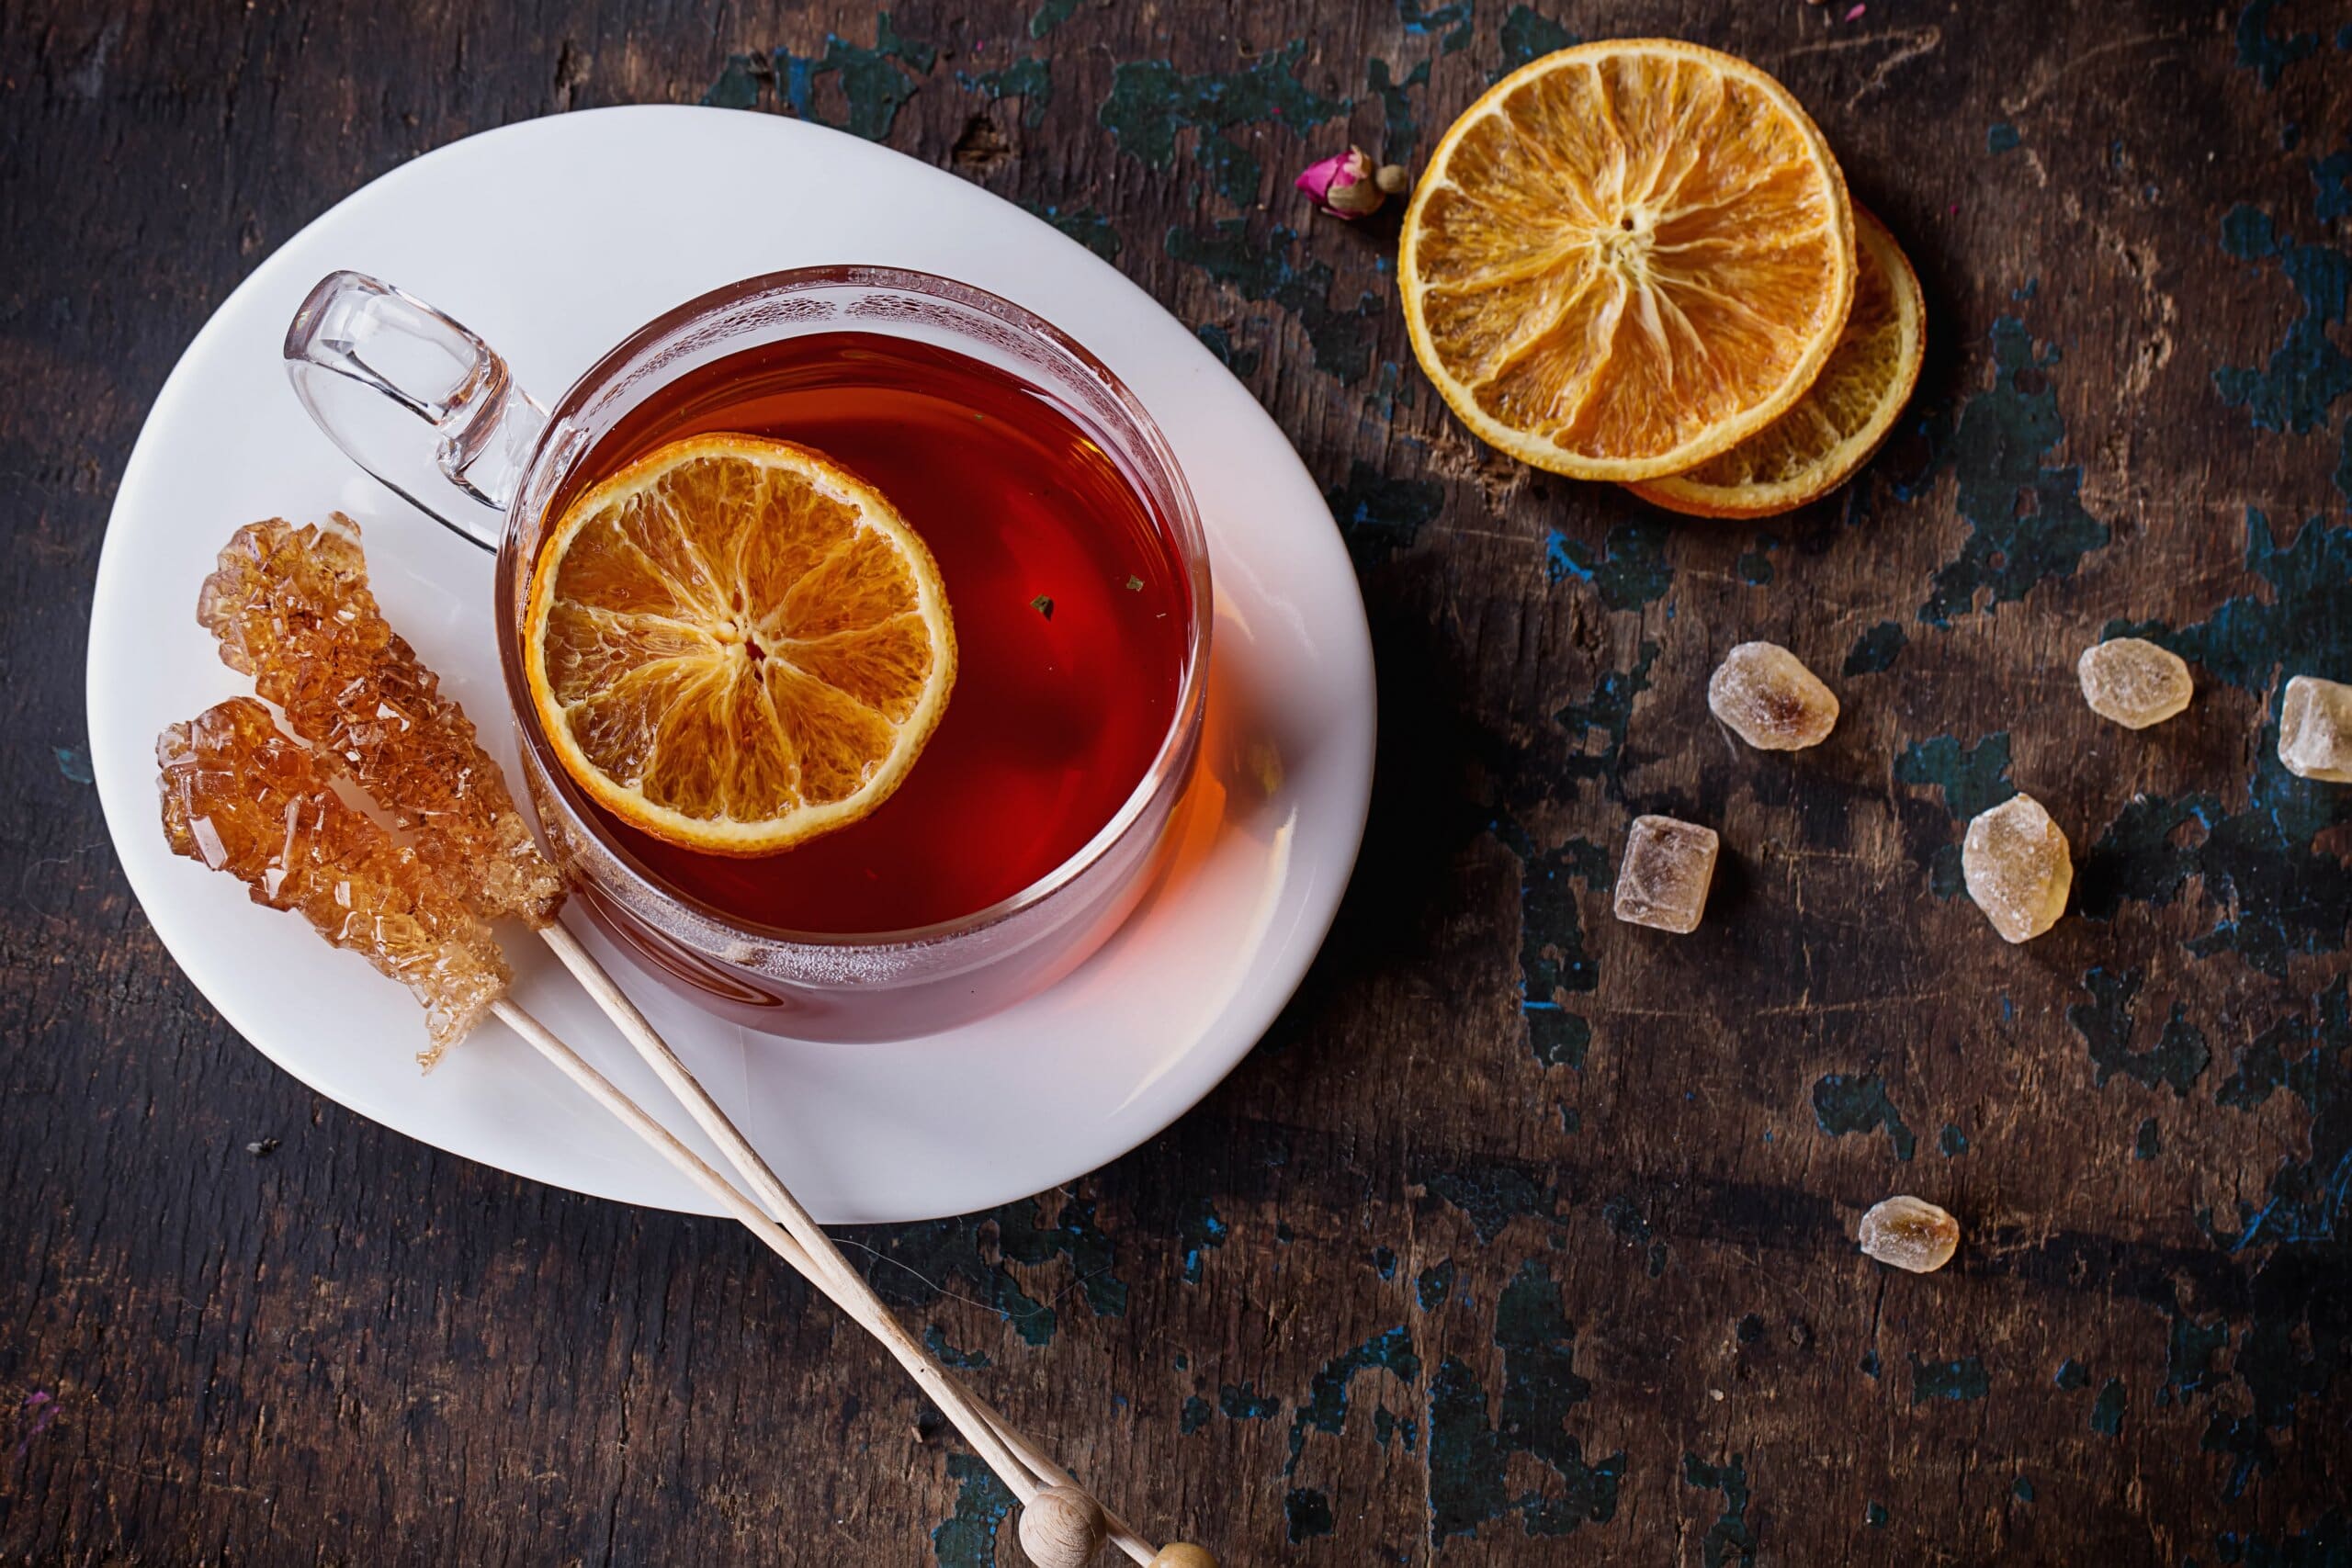 Mug of red bush tea surrounded by dried orange slices and candied sugar sticks on a saucer.